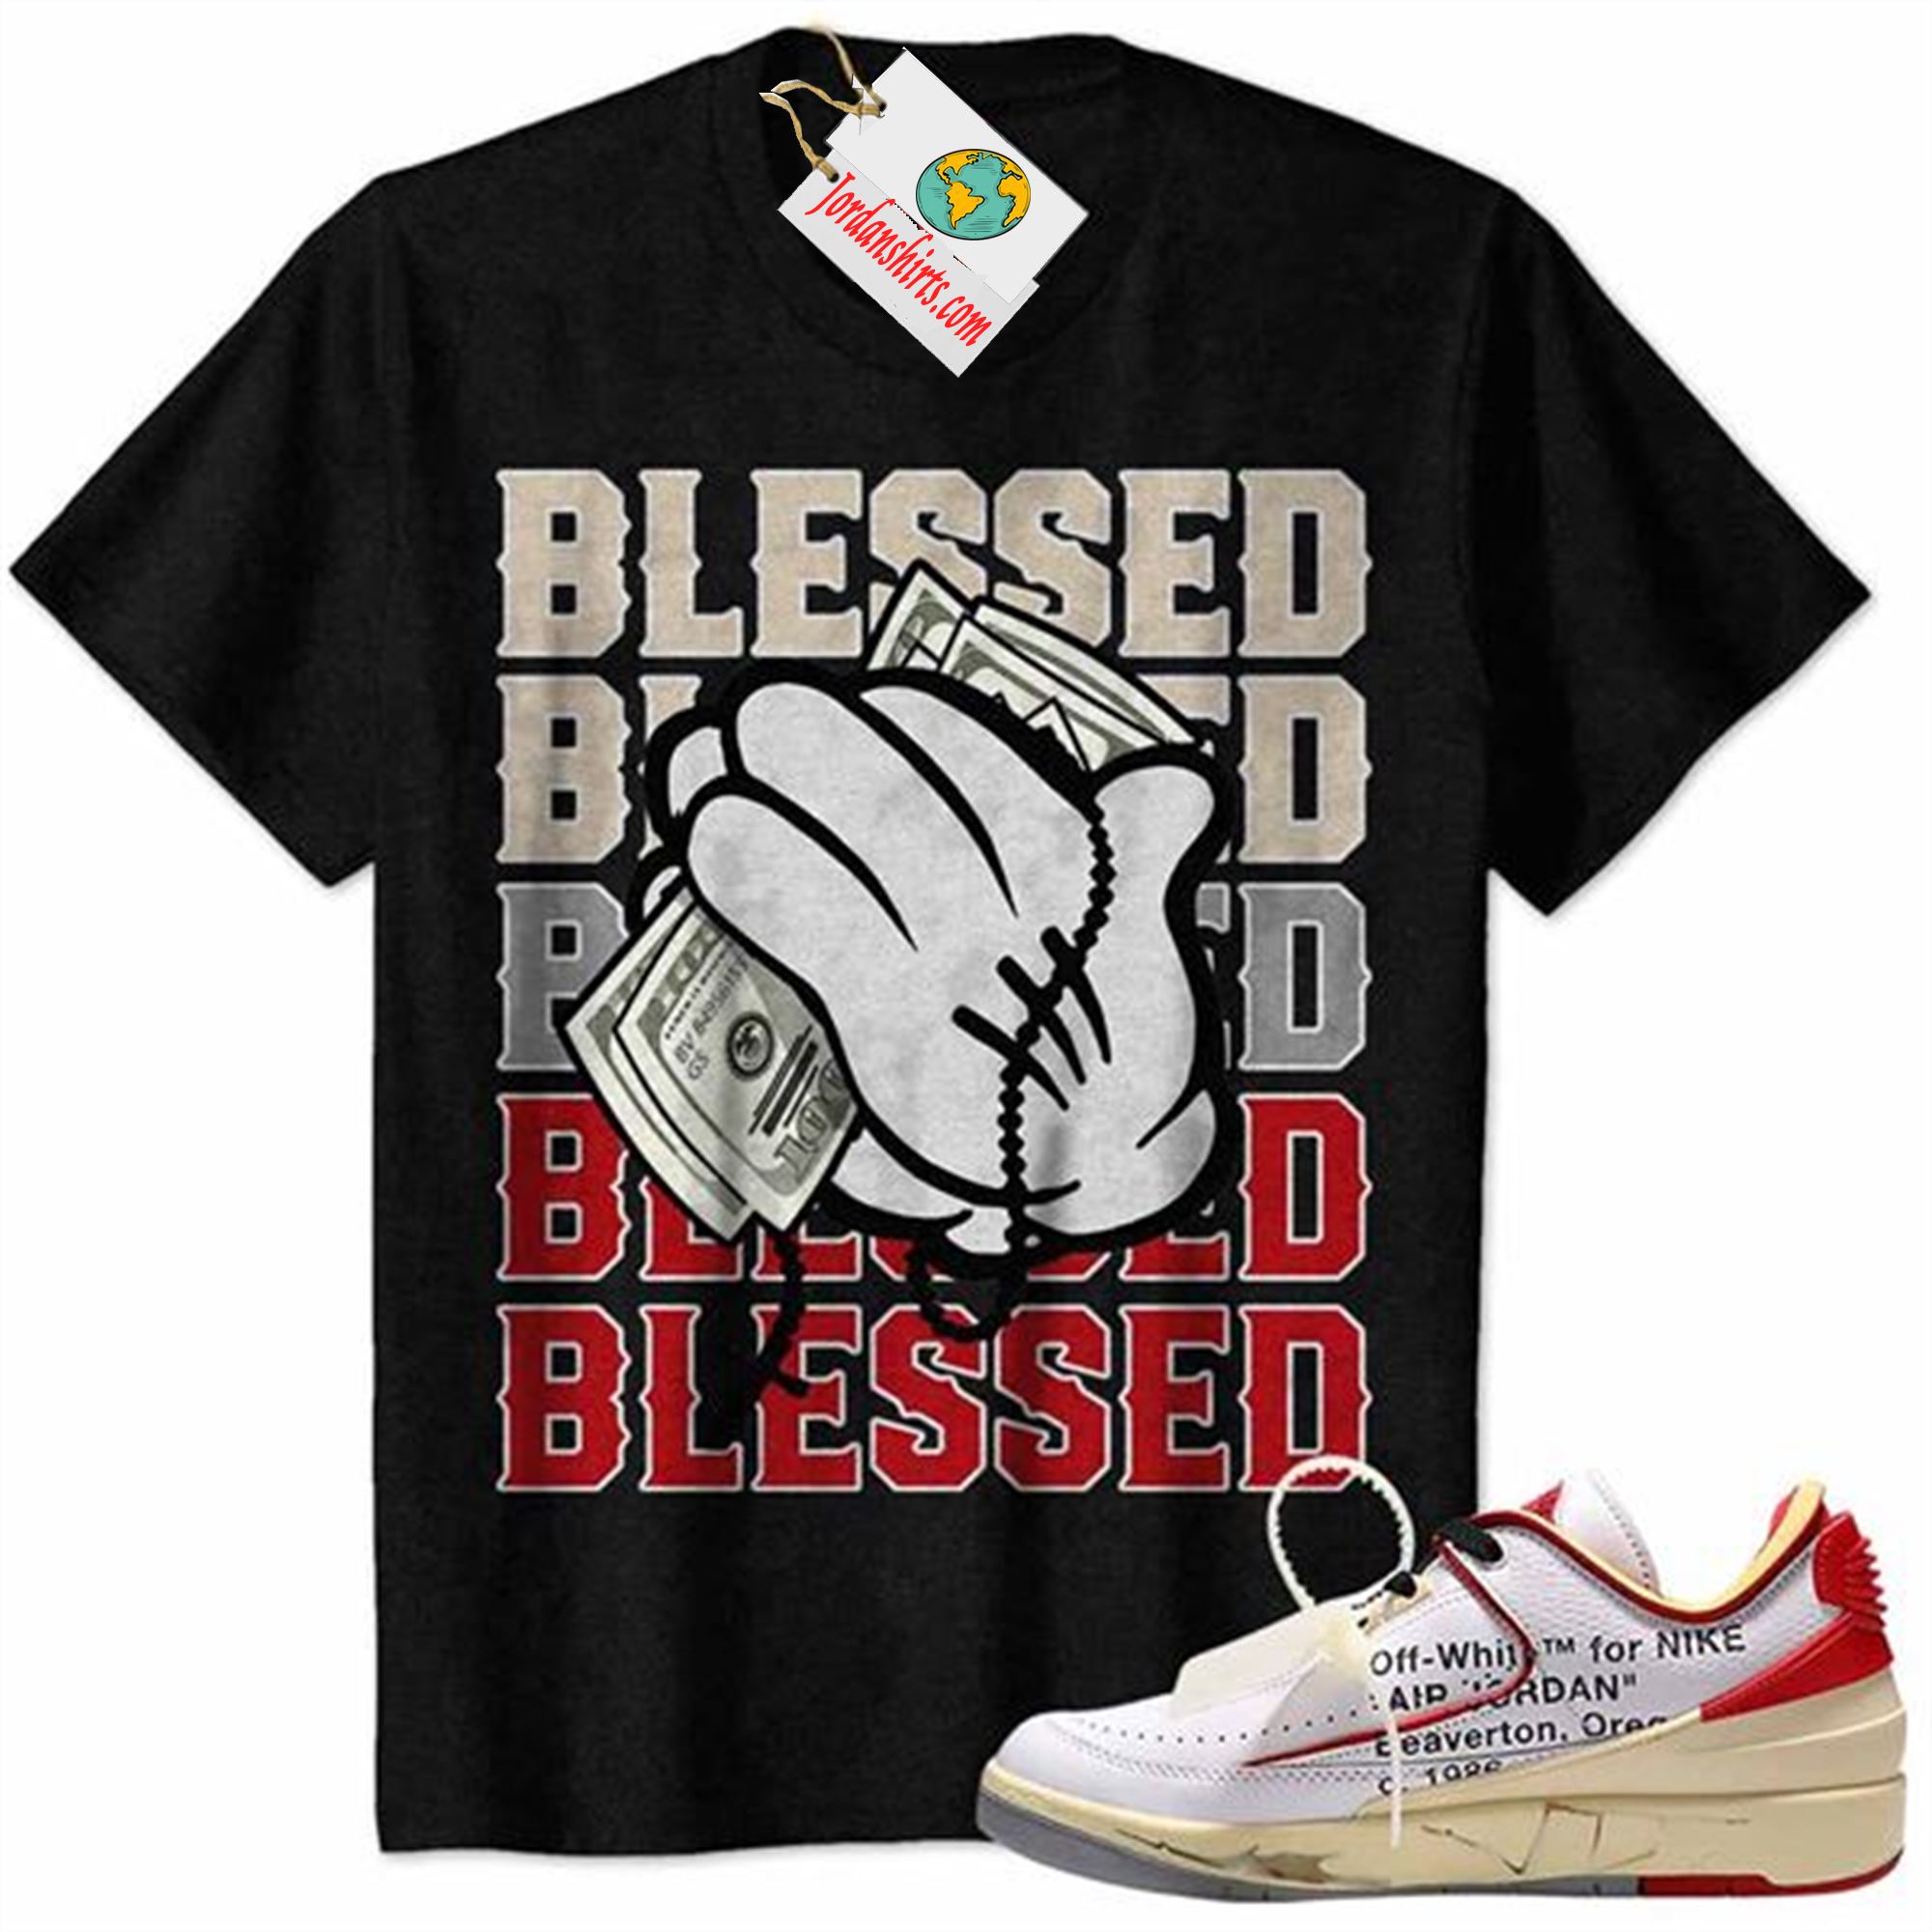 Jordan 2 Shirt, Mouse Blessed Black Air Jordan 2 Low White Red Off-white 2s Size Up To 5xl